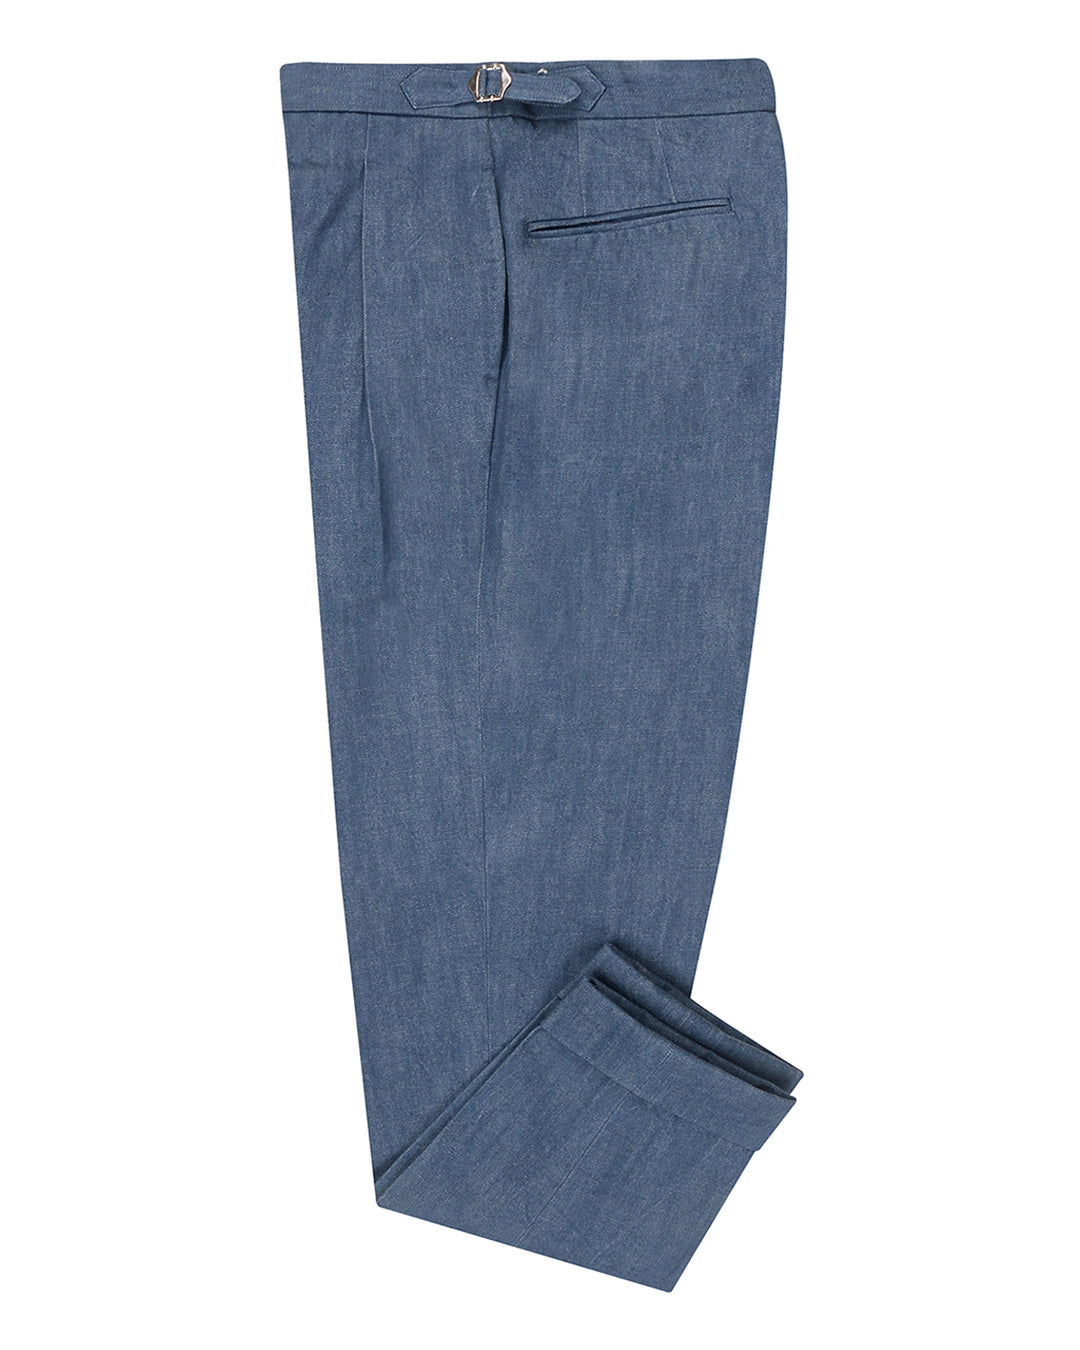 Blue Selvage With Turquoise Tint - 15 Oz